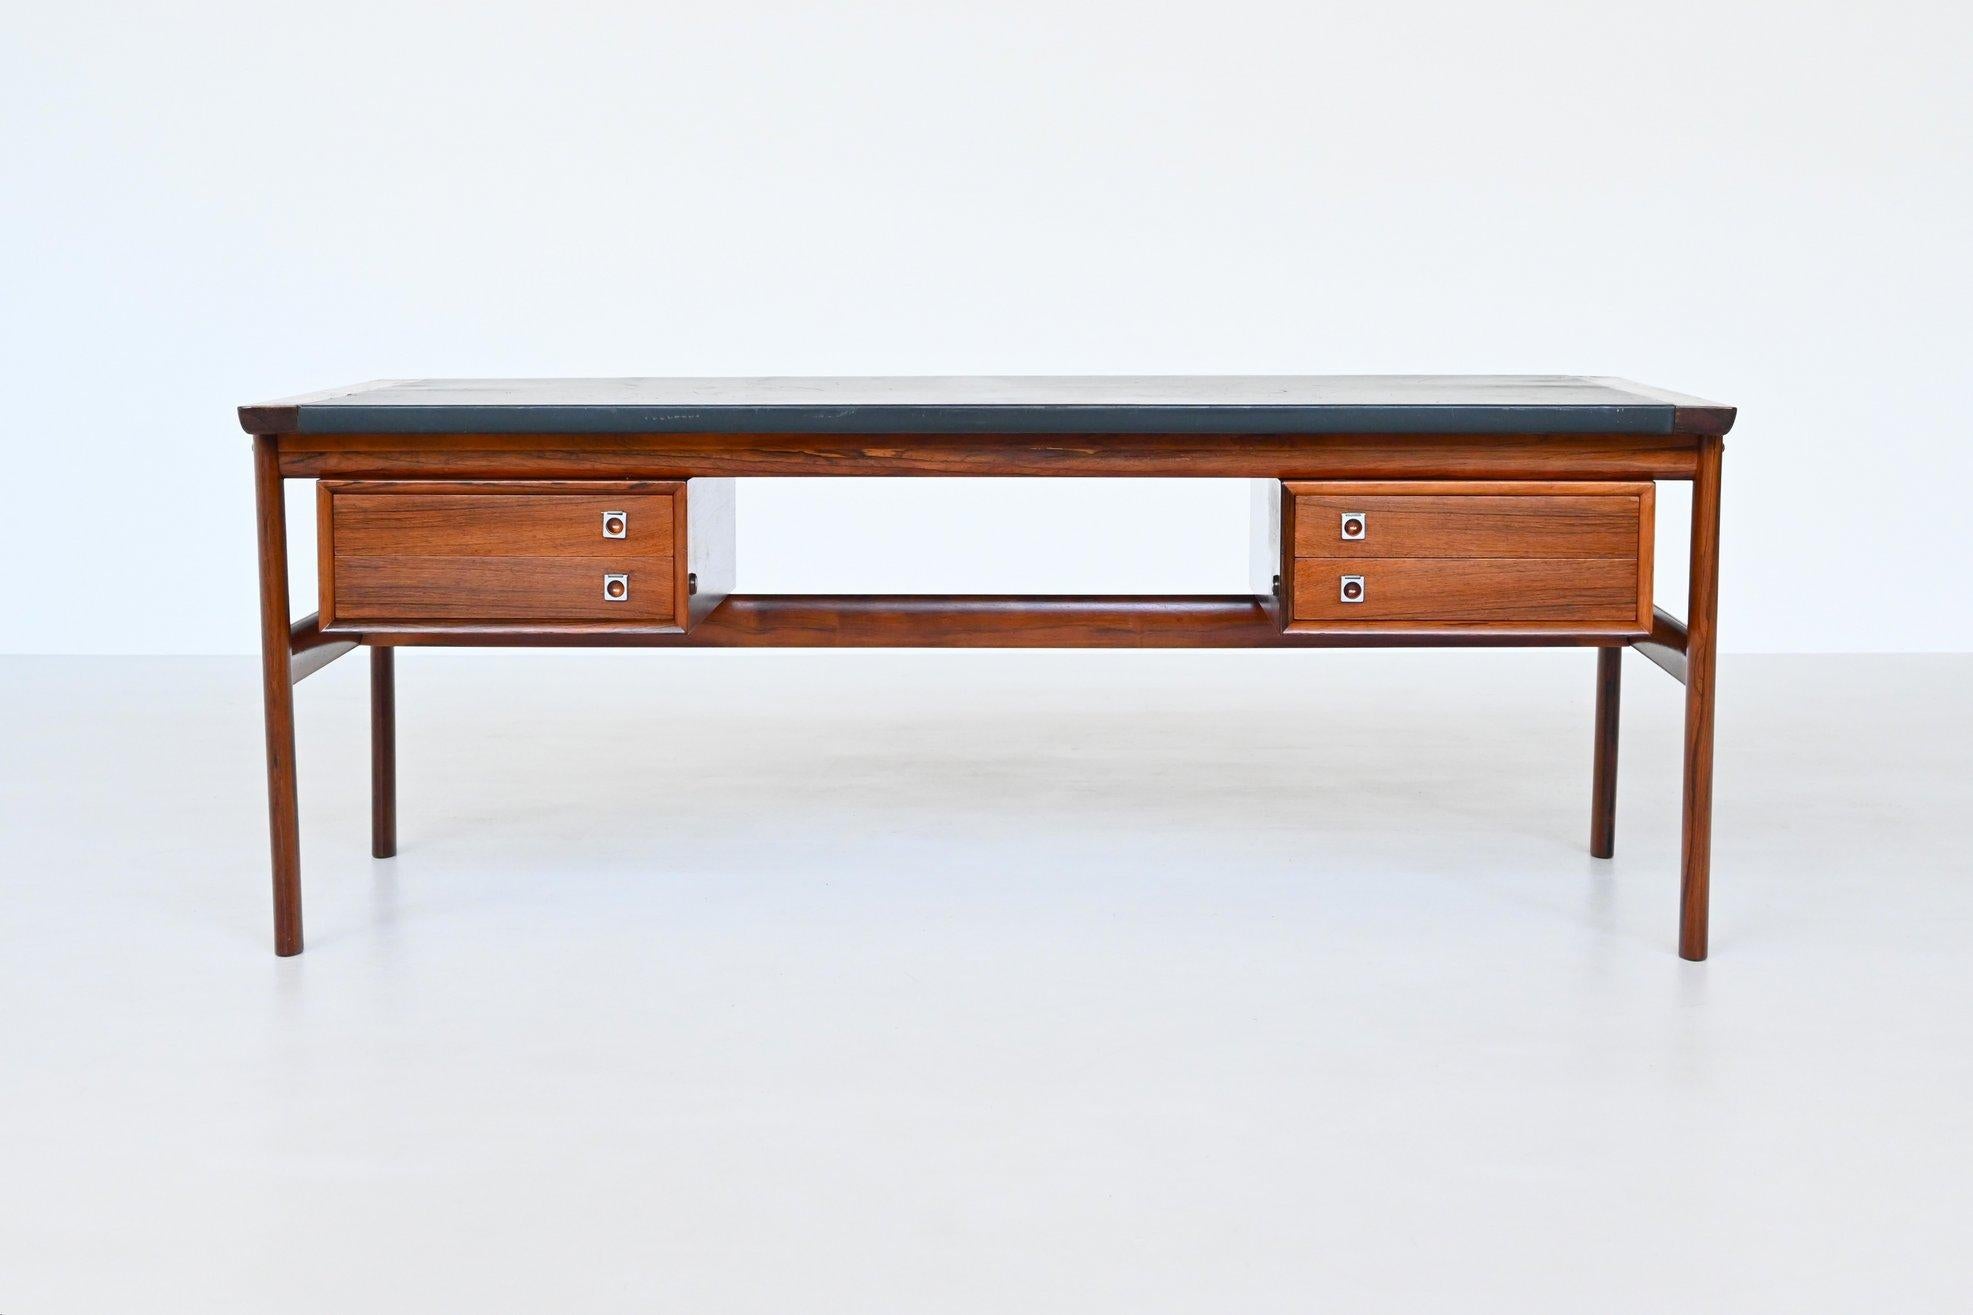 Iconic executive desk from the “200 series” designed by Arne Vodder; one of the best designers Denmark has known and it is manufactured by Sibast Furniture, Denmark 1960. This luxurious desk features a lot of storage space and shows wonderful